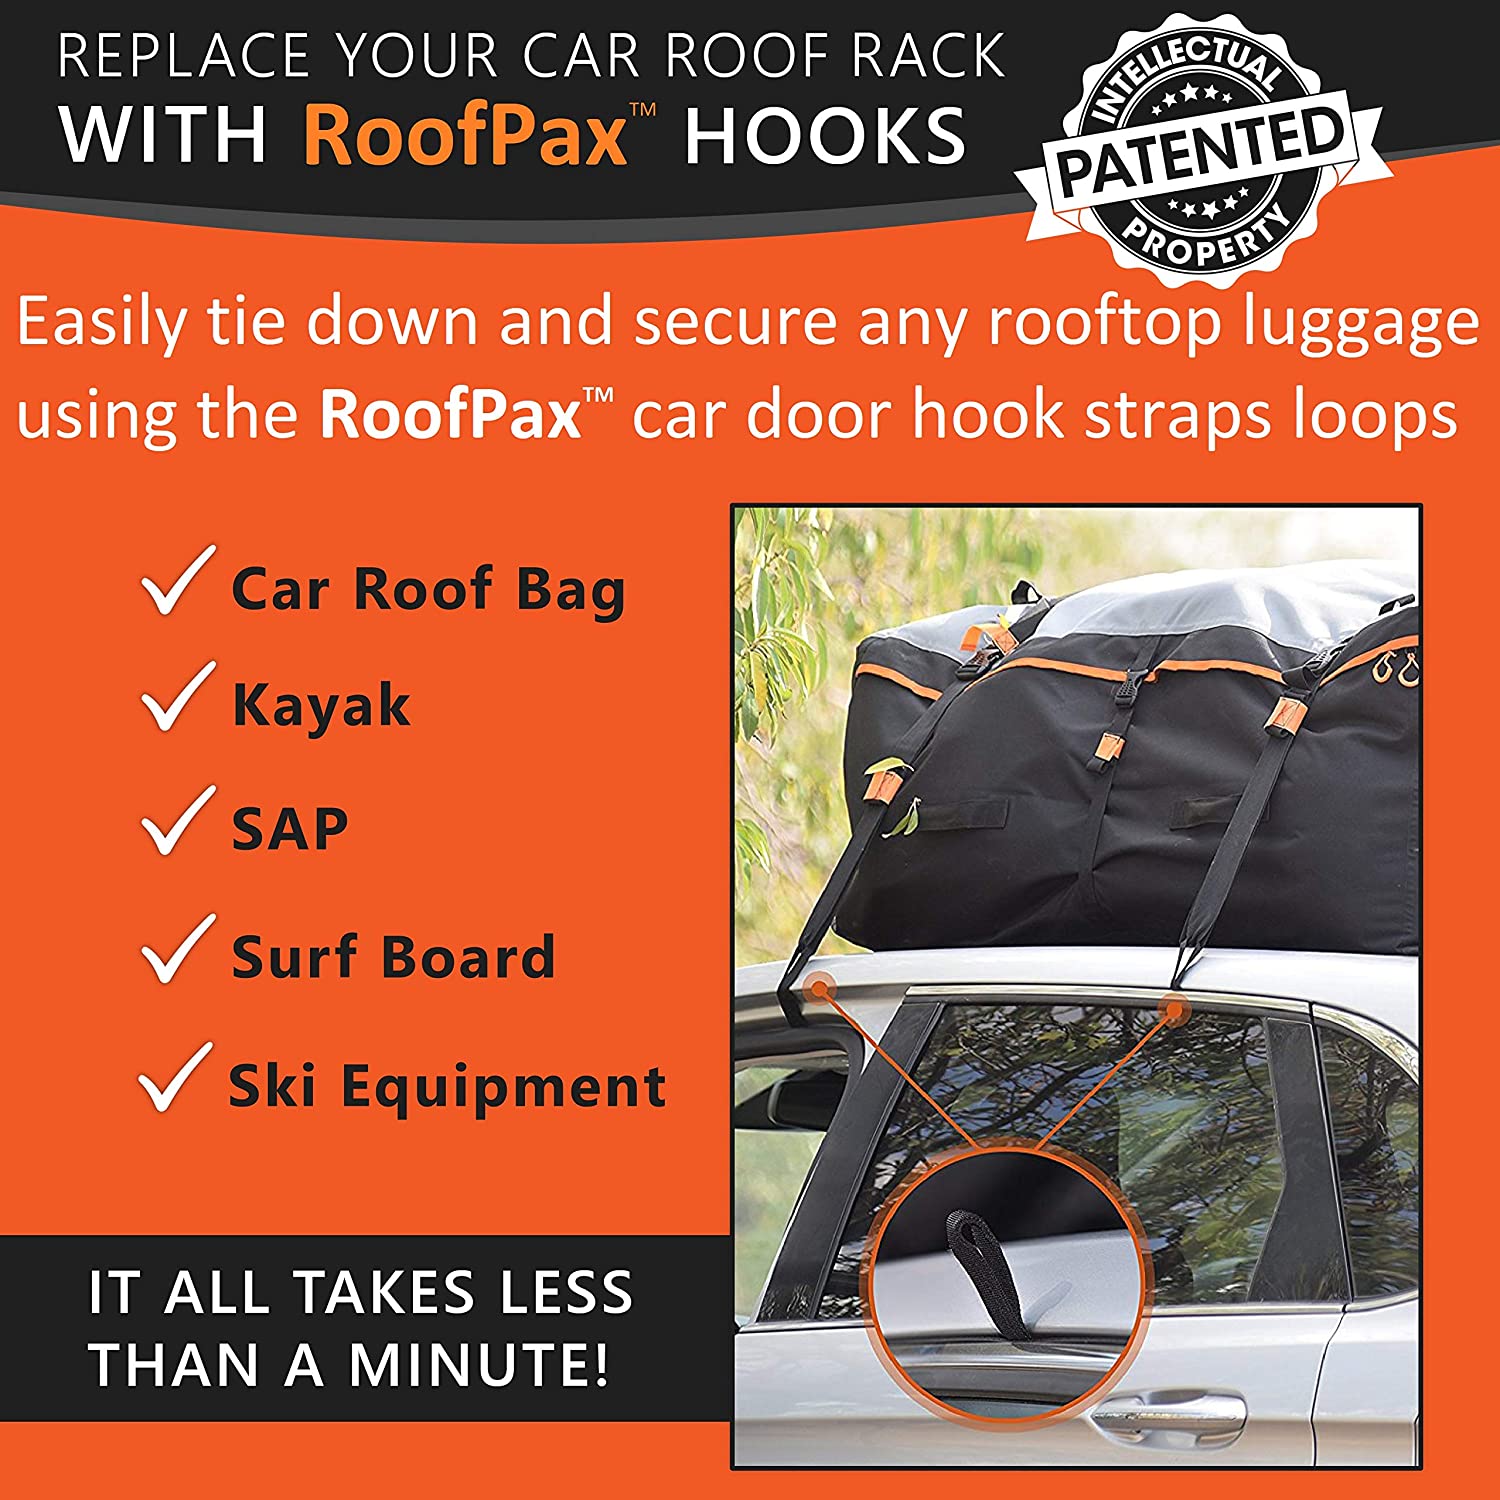 Heavy Duty Rooftop Tie Downs Kit Bundle Cargo Tiedowns for Car Top Luggage 6 Patented Rooftop Luggage Door Hook Straps + 5,208 Break Strength S Hooks w/ 4 Soft Loops. 1.6 in x 8 ft 2-Pack 